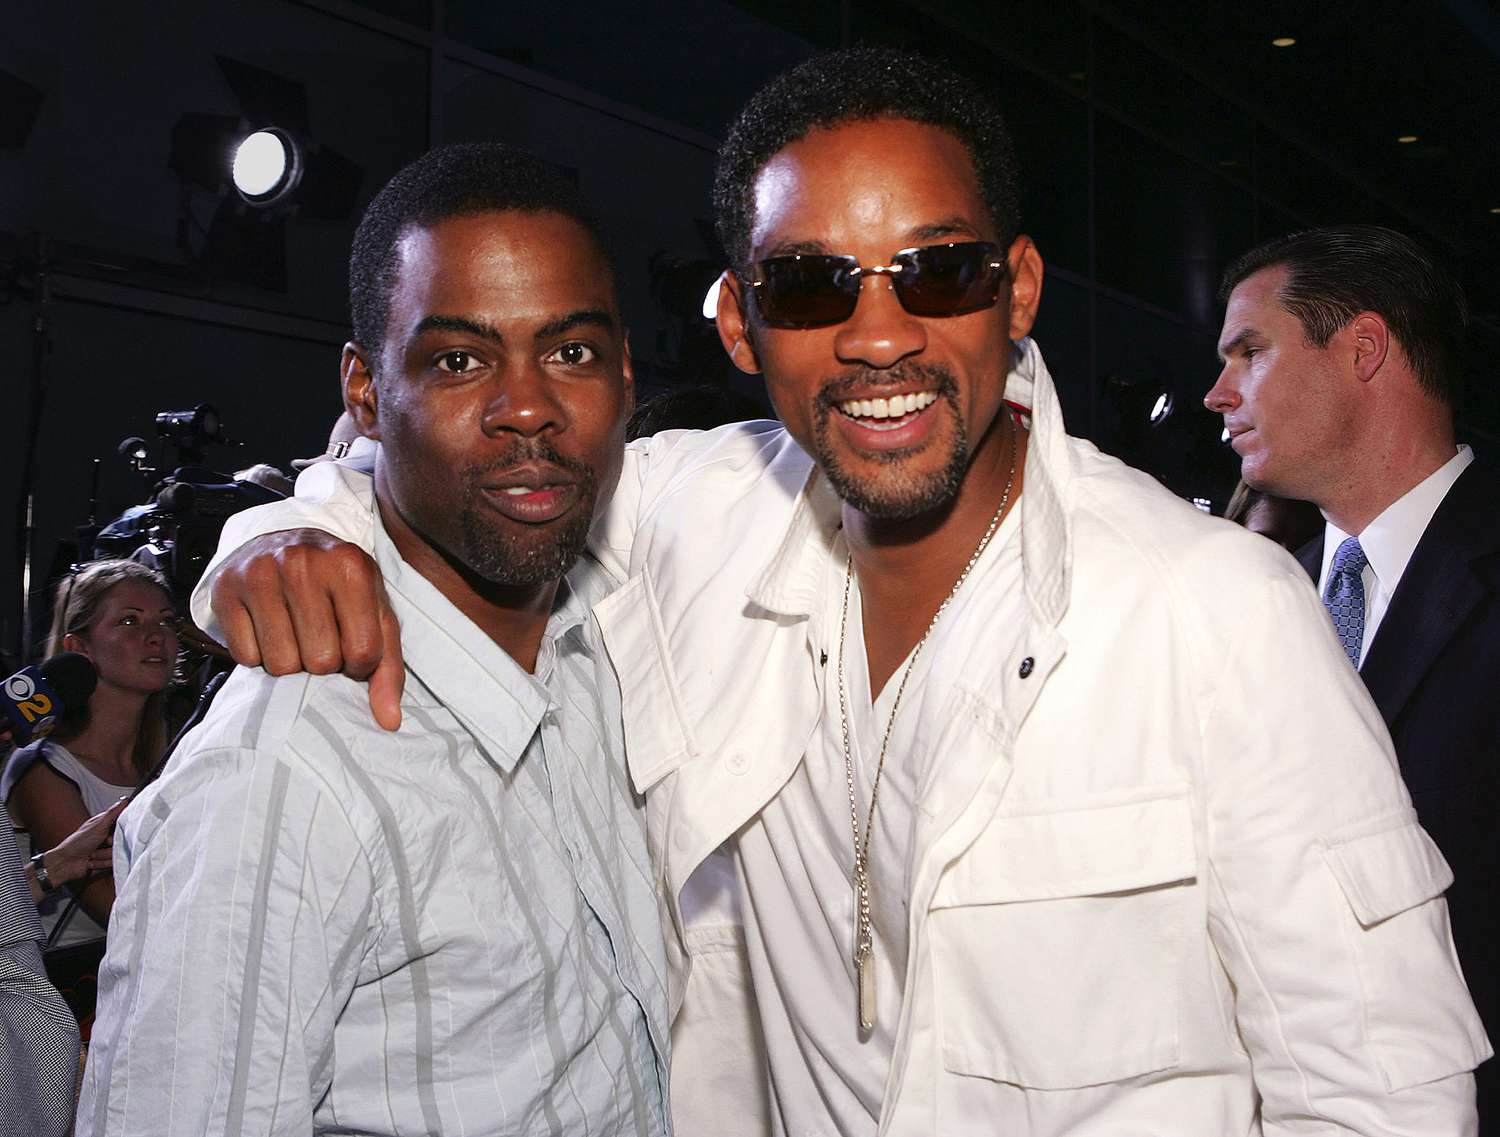 Will Smith and Chris Rock through the years